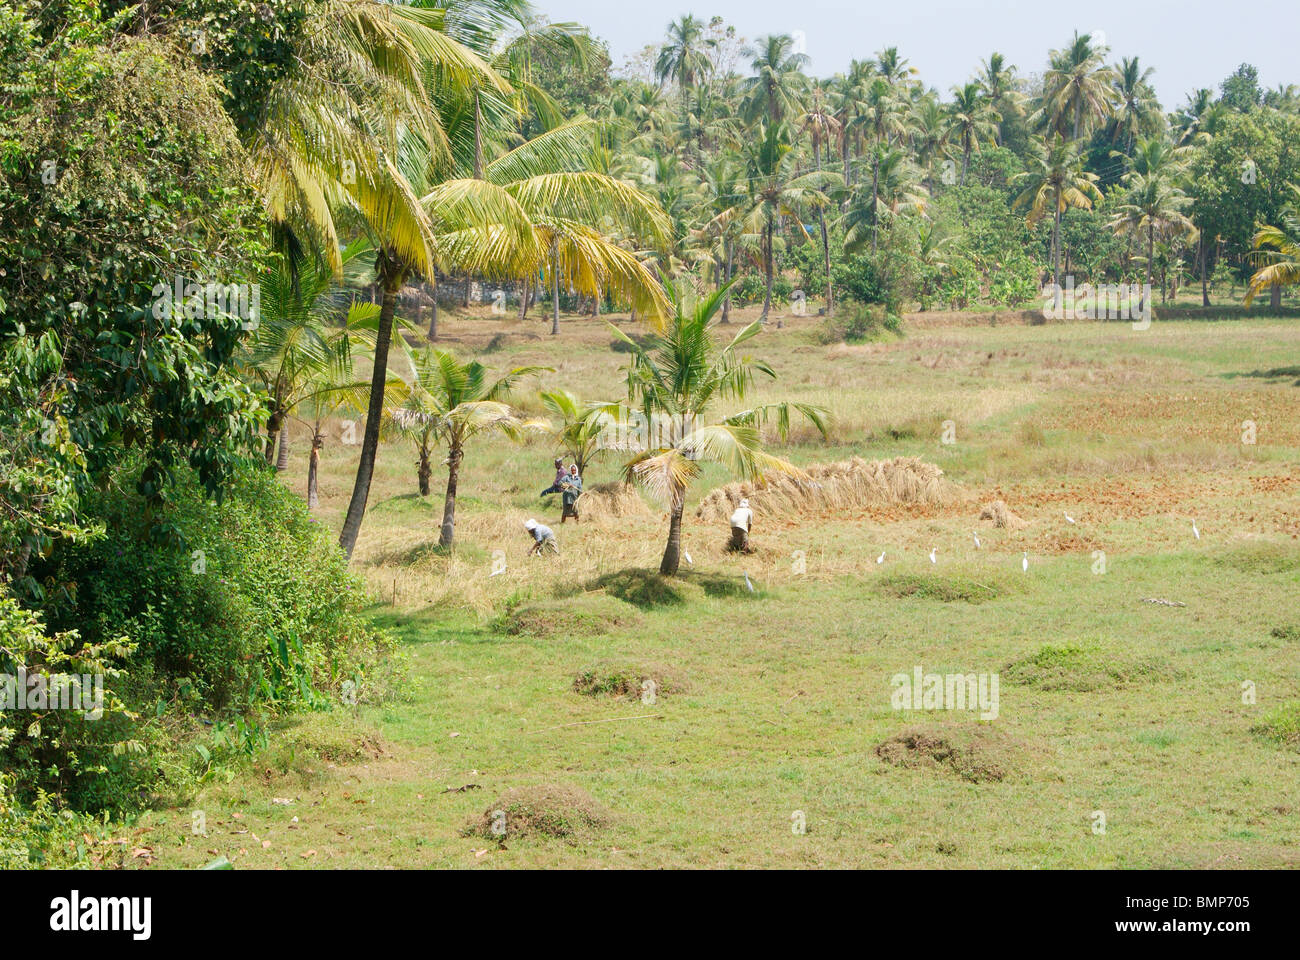 Kerala Agricultural Land .A Beautiful scenery of Indian Kerala Farmers arranging their Rice farms after seasonal cultivation Stock Photo